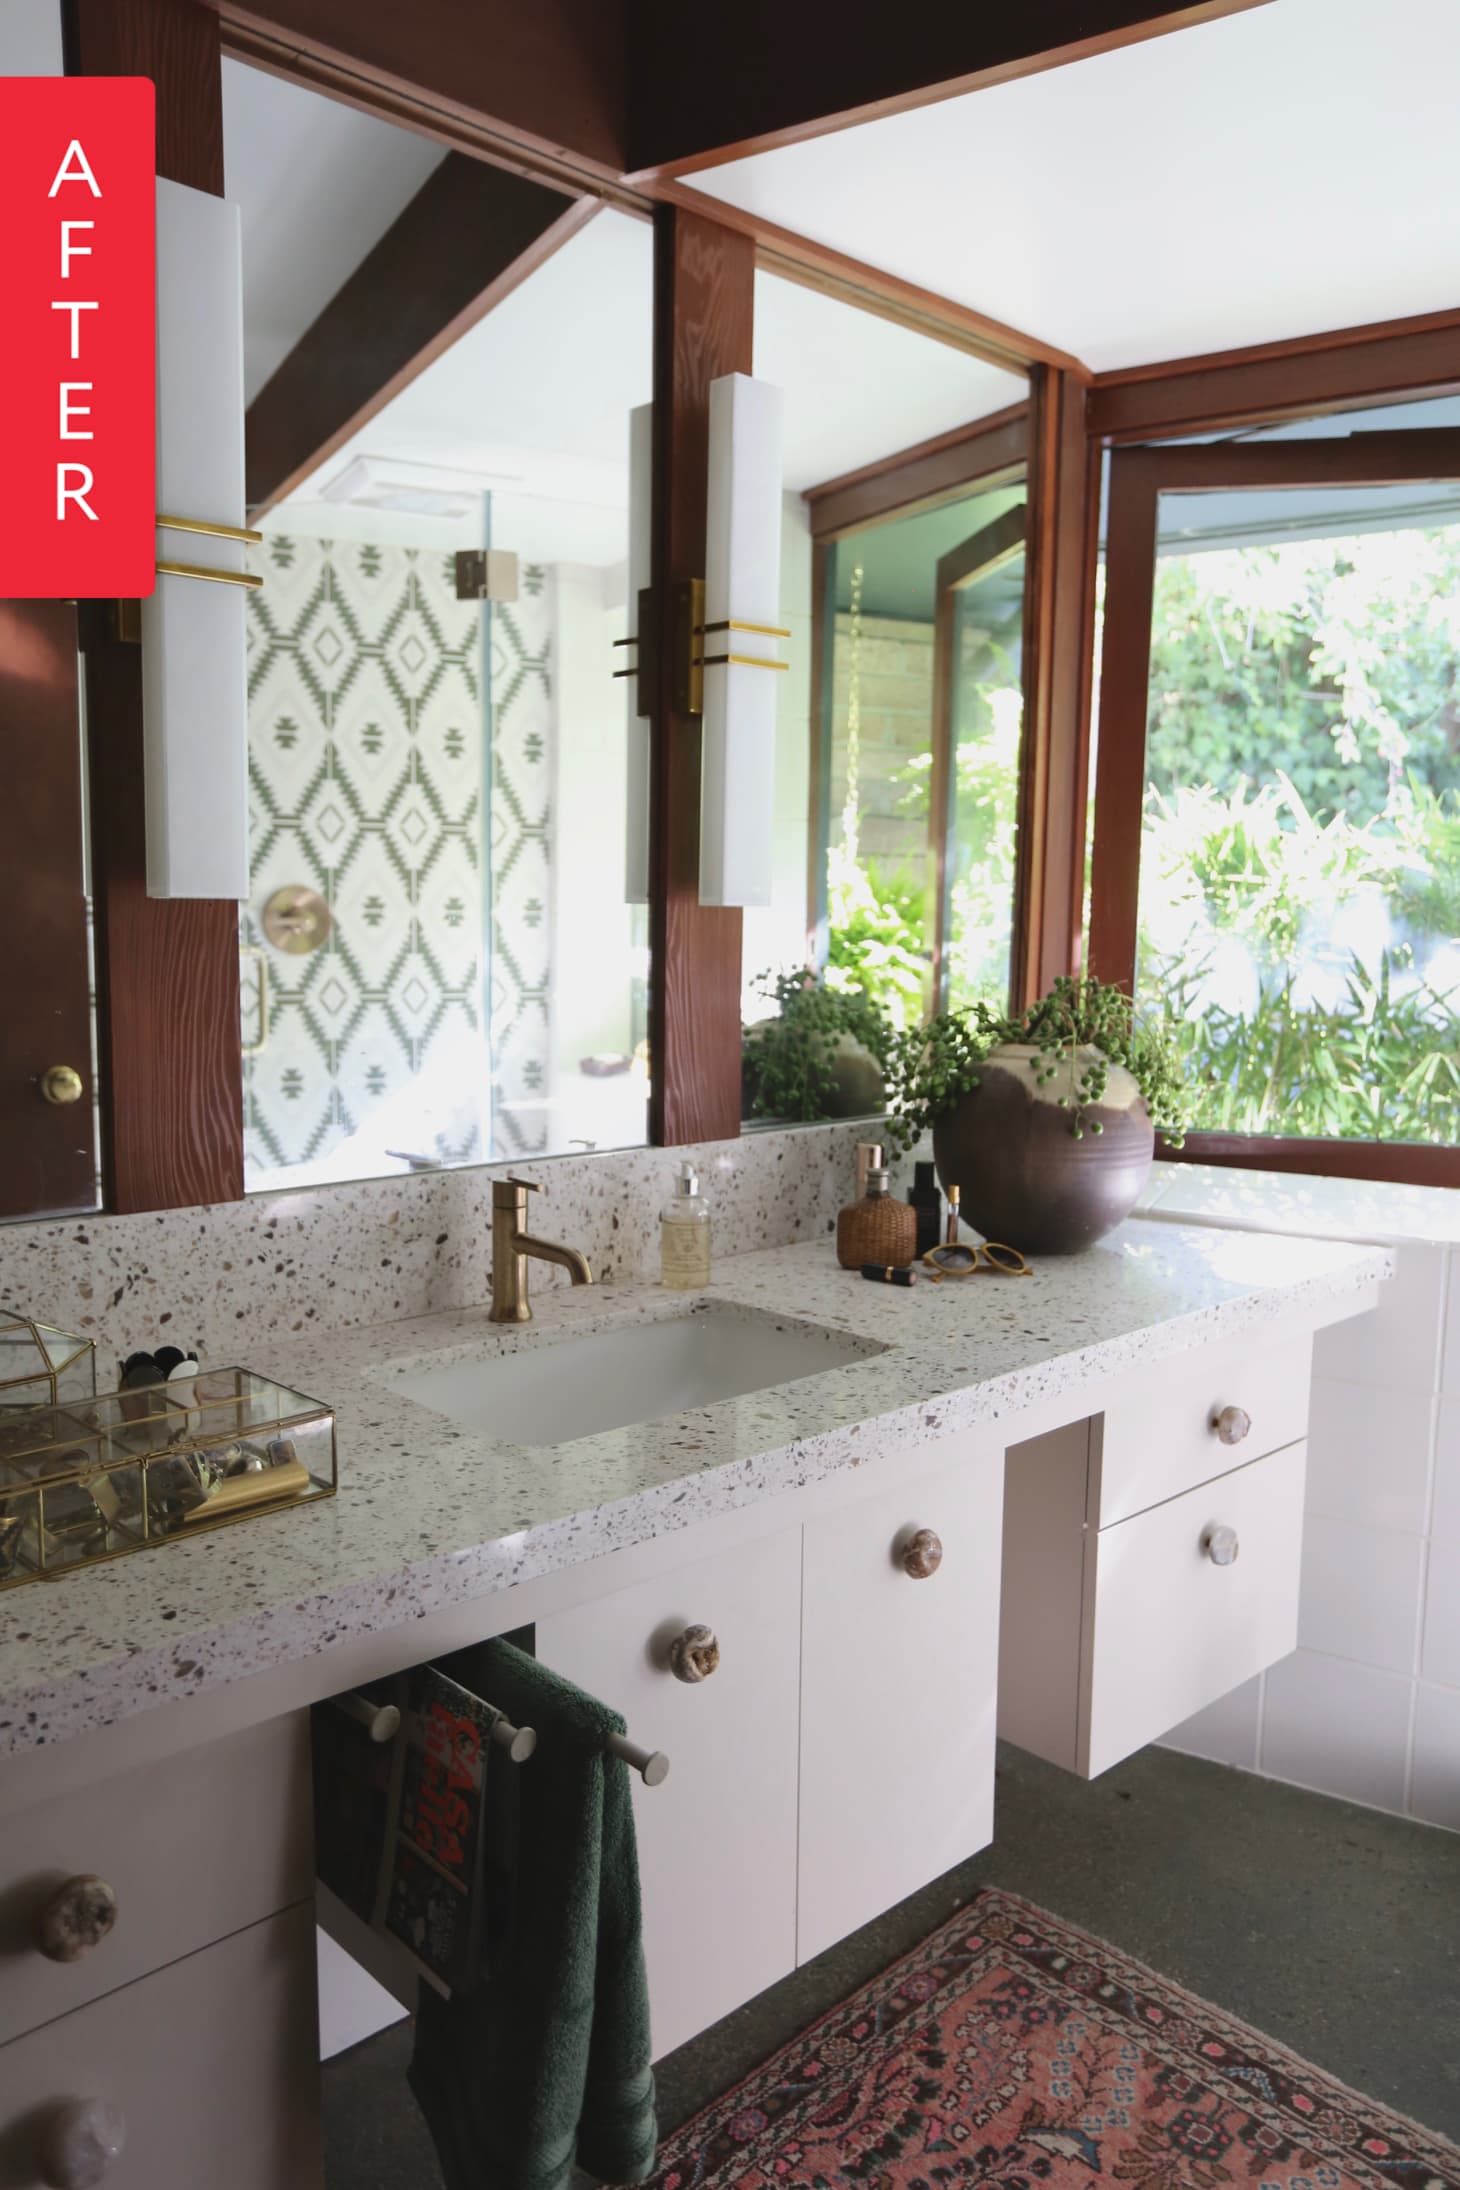 Before & After: A Gorgeous Mid-Century Bathroom Makeover ...